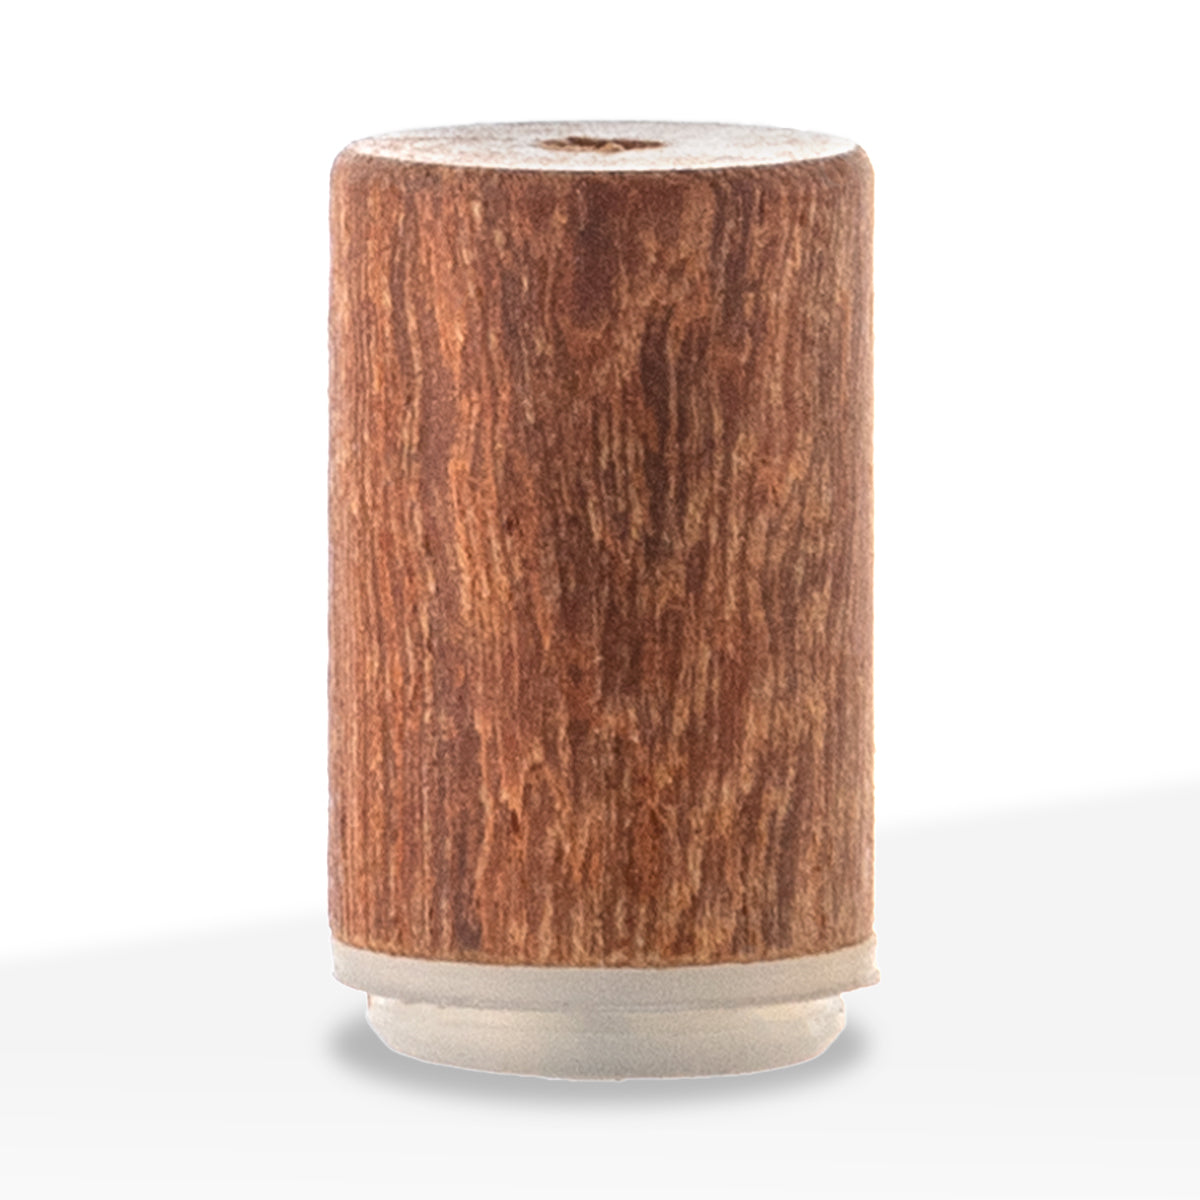 Vape Mouth Tip | Wooden Mouth Piece | 100 Count - Various Styles